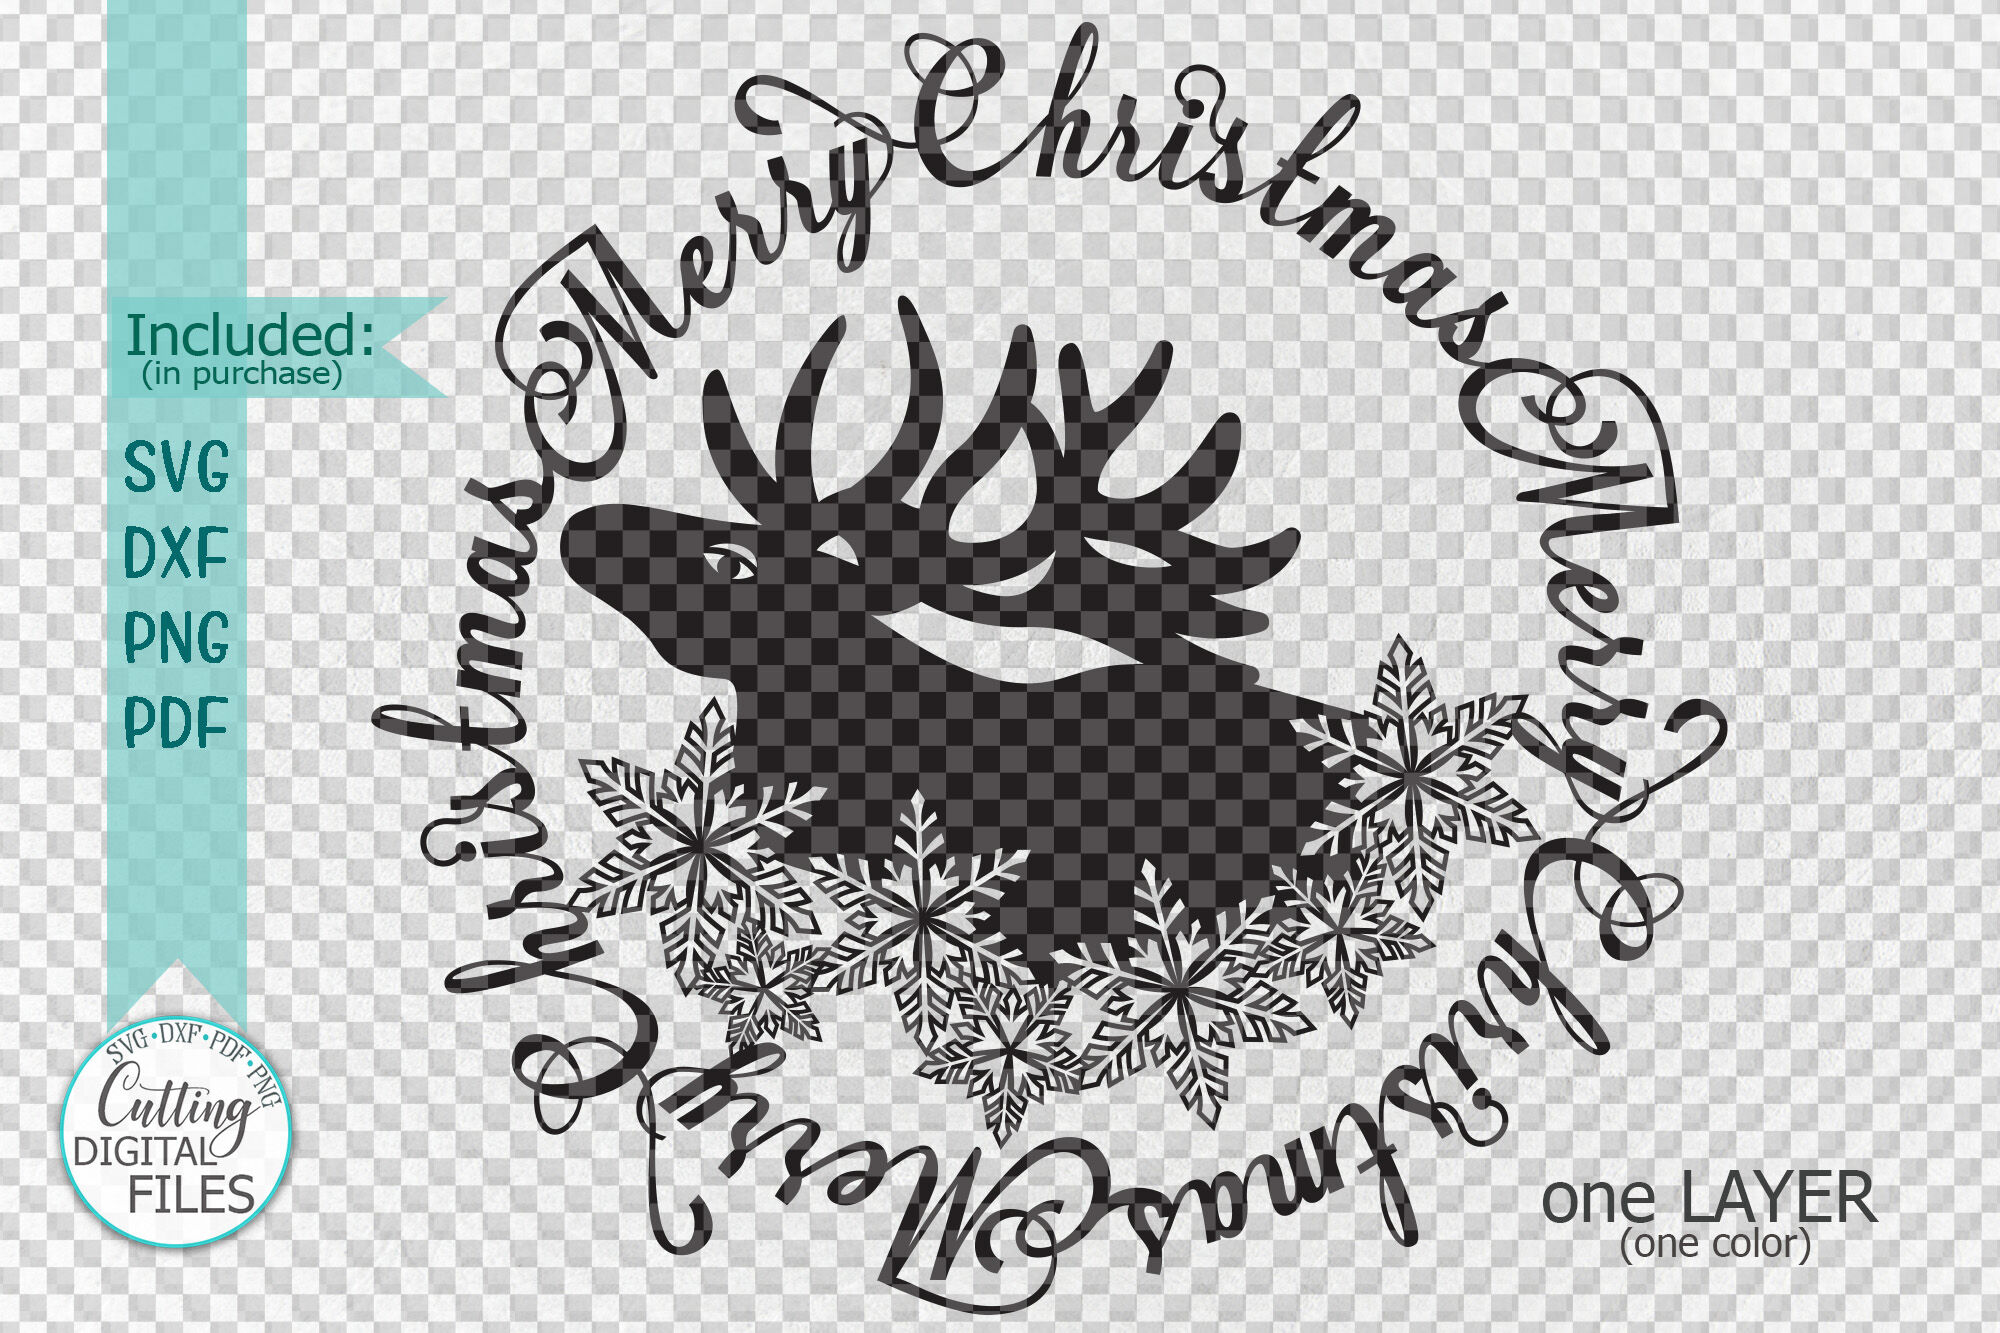 Download Merry Christmas Moose Snowflakes circle framed svg cut out ...